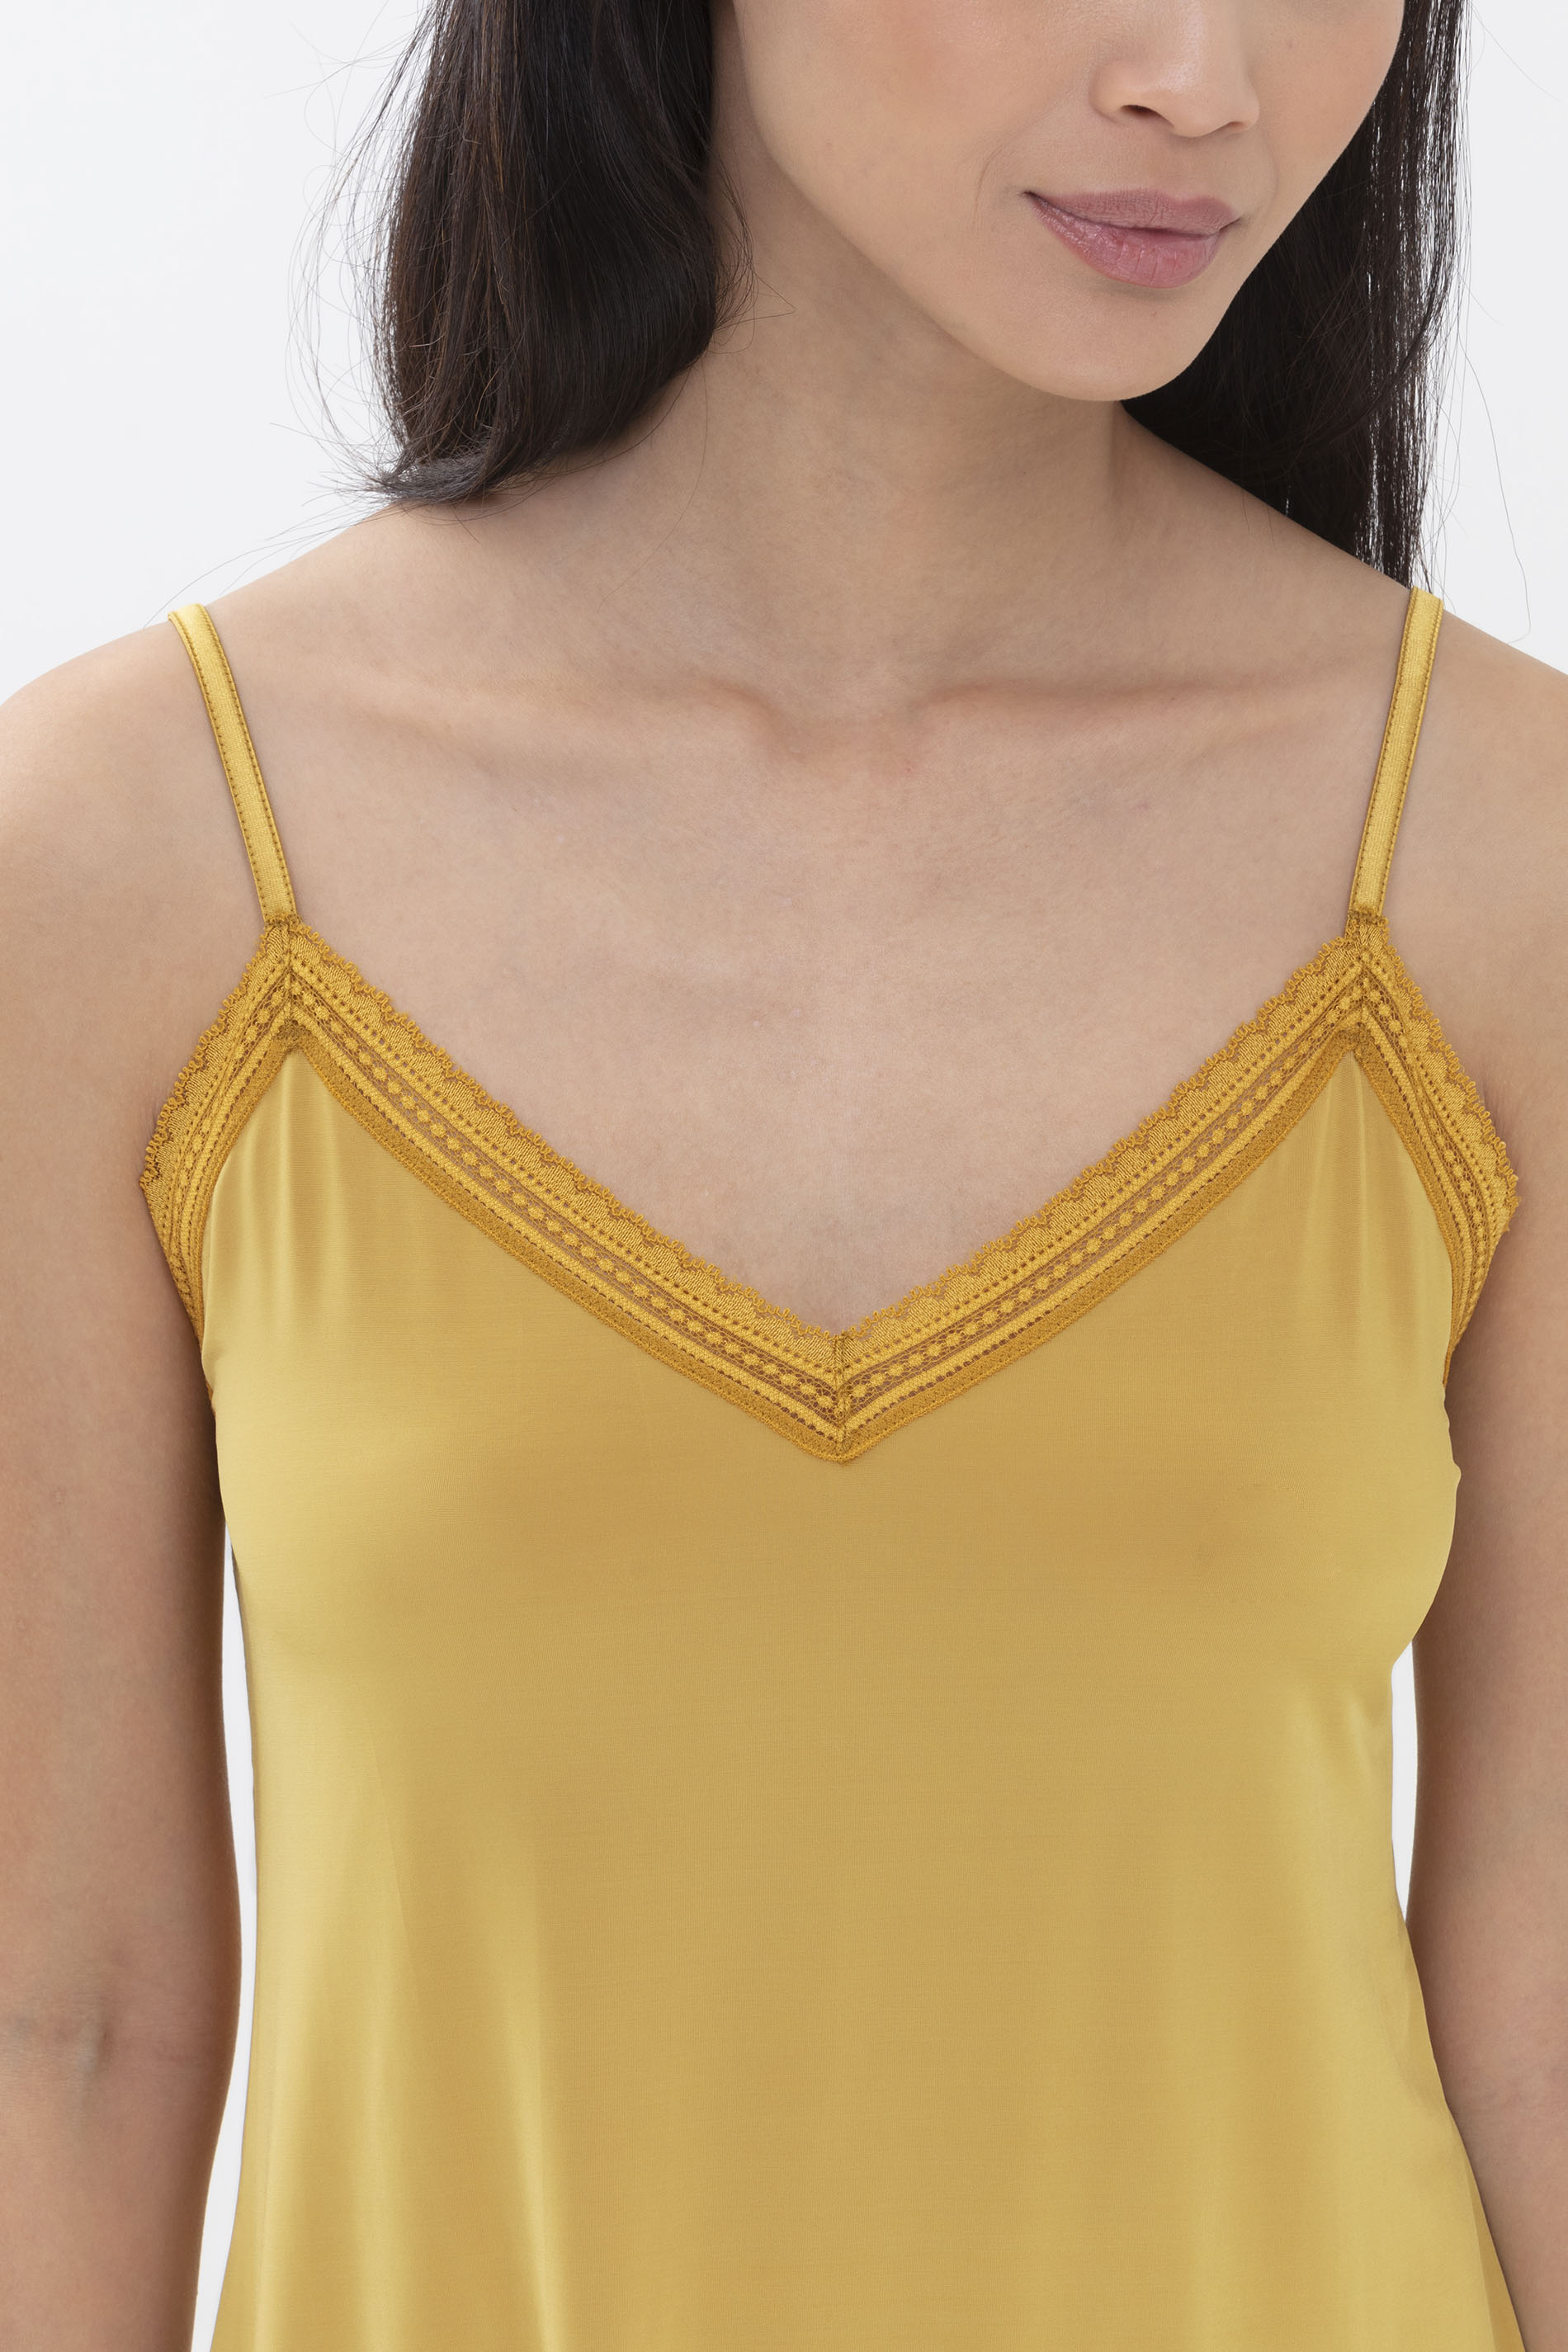 Camisole Wintergold Serie Poetry Glam Detail View 01 | mey®